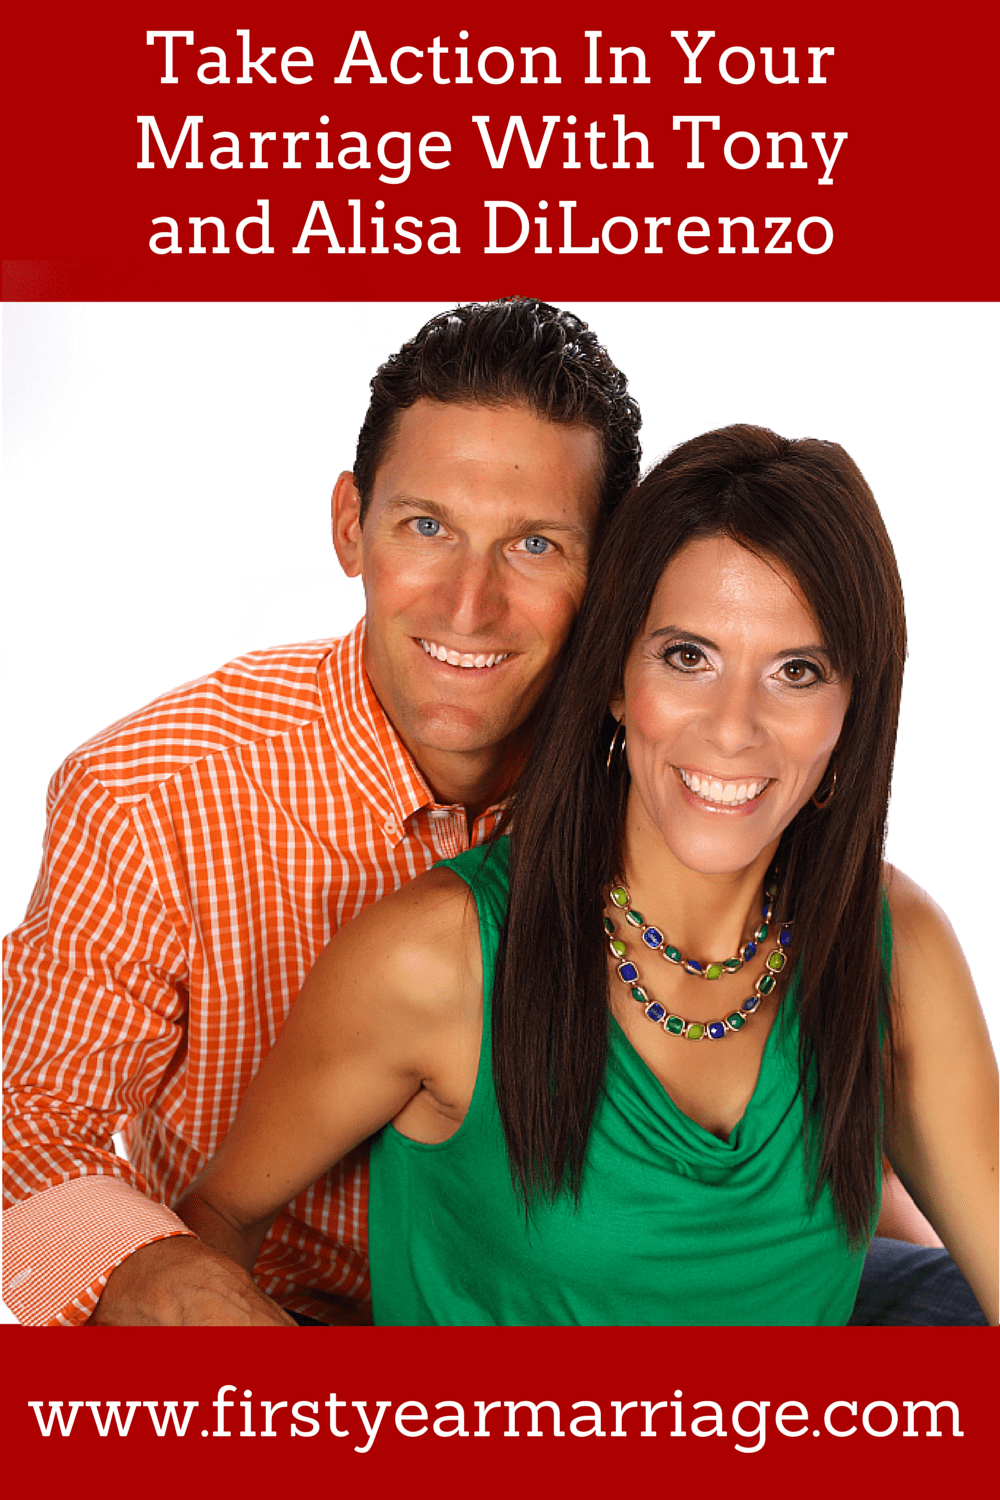 Take Action In Your Marriage With Tony and Alisa DiLorenzo